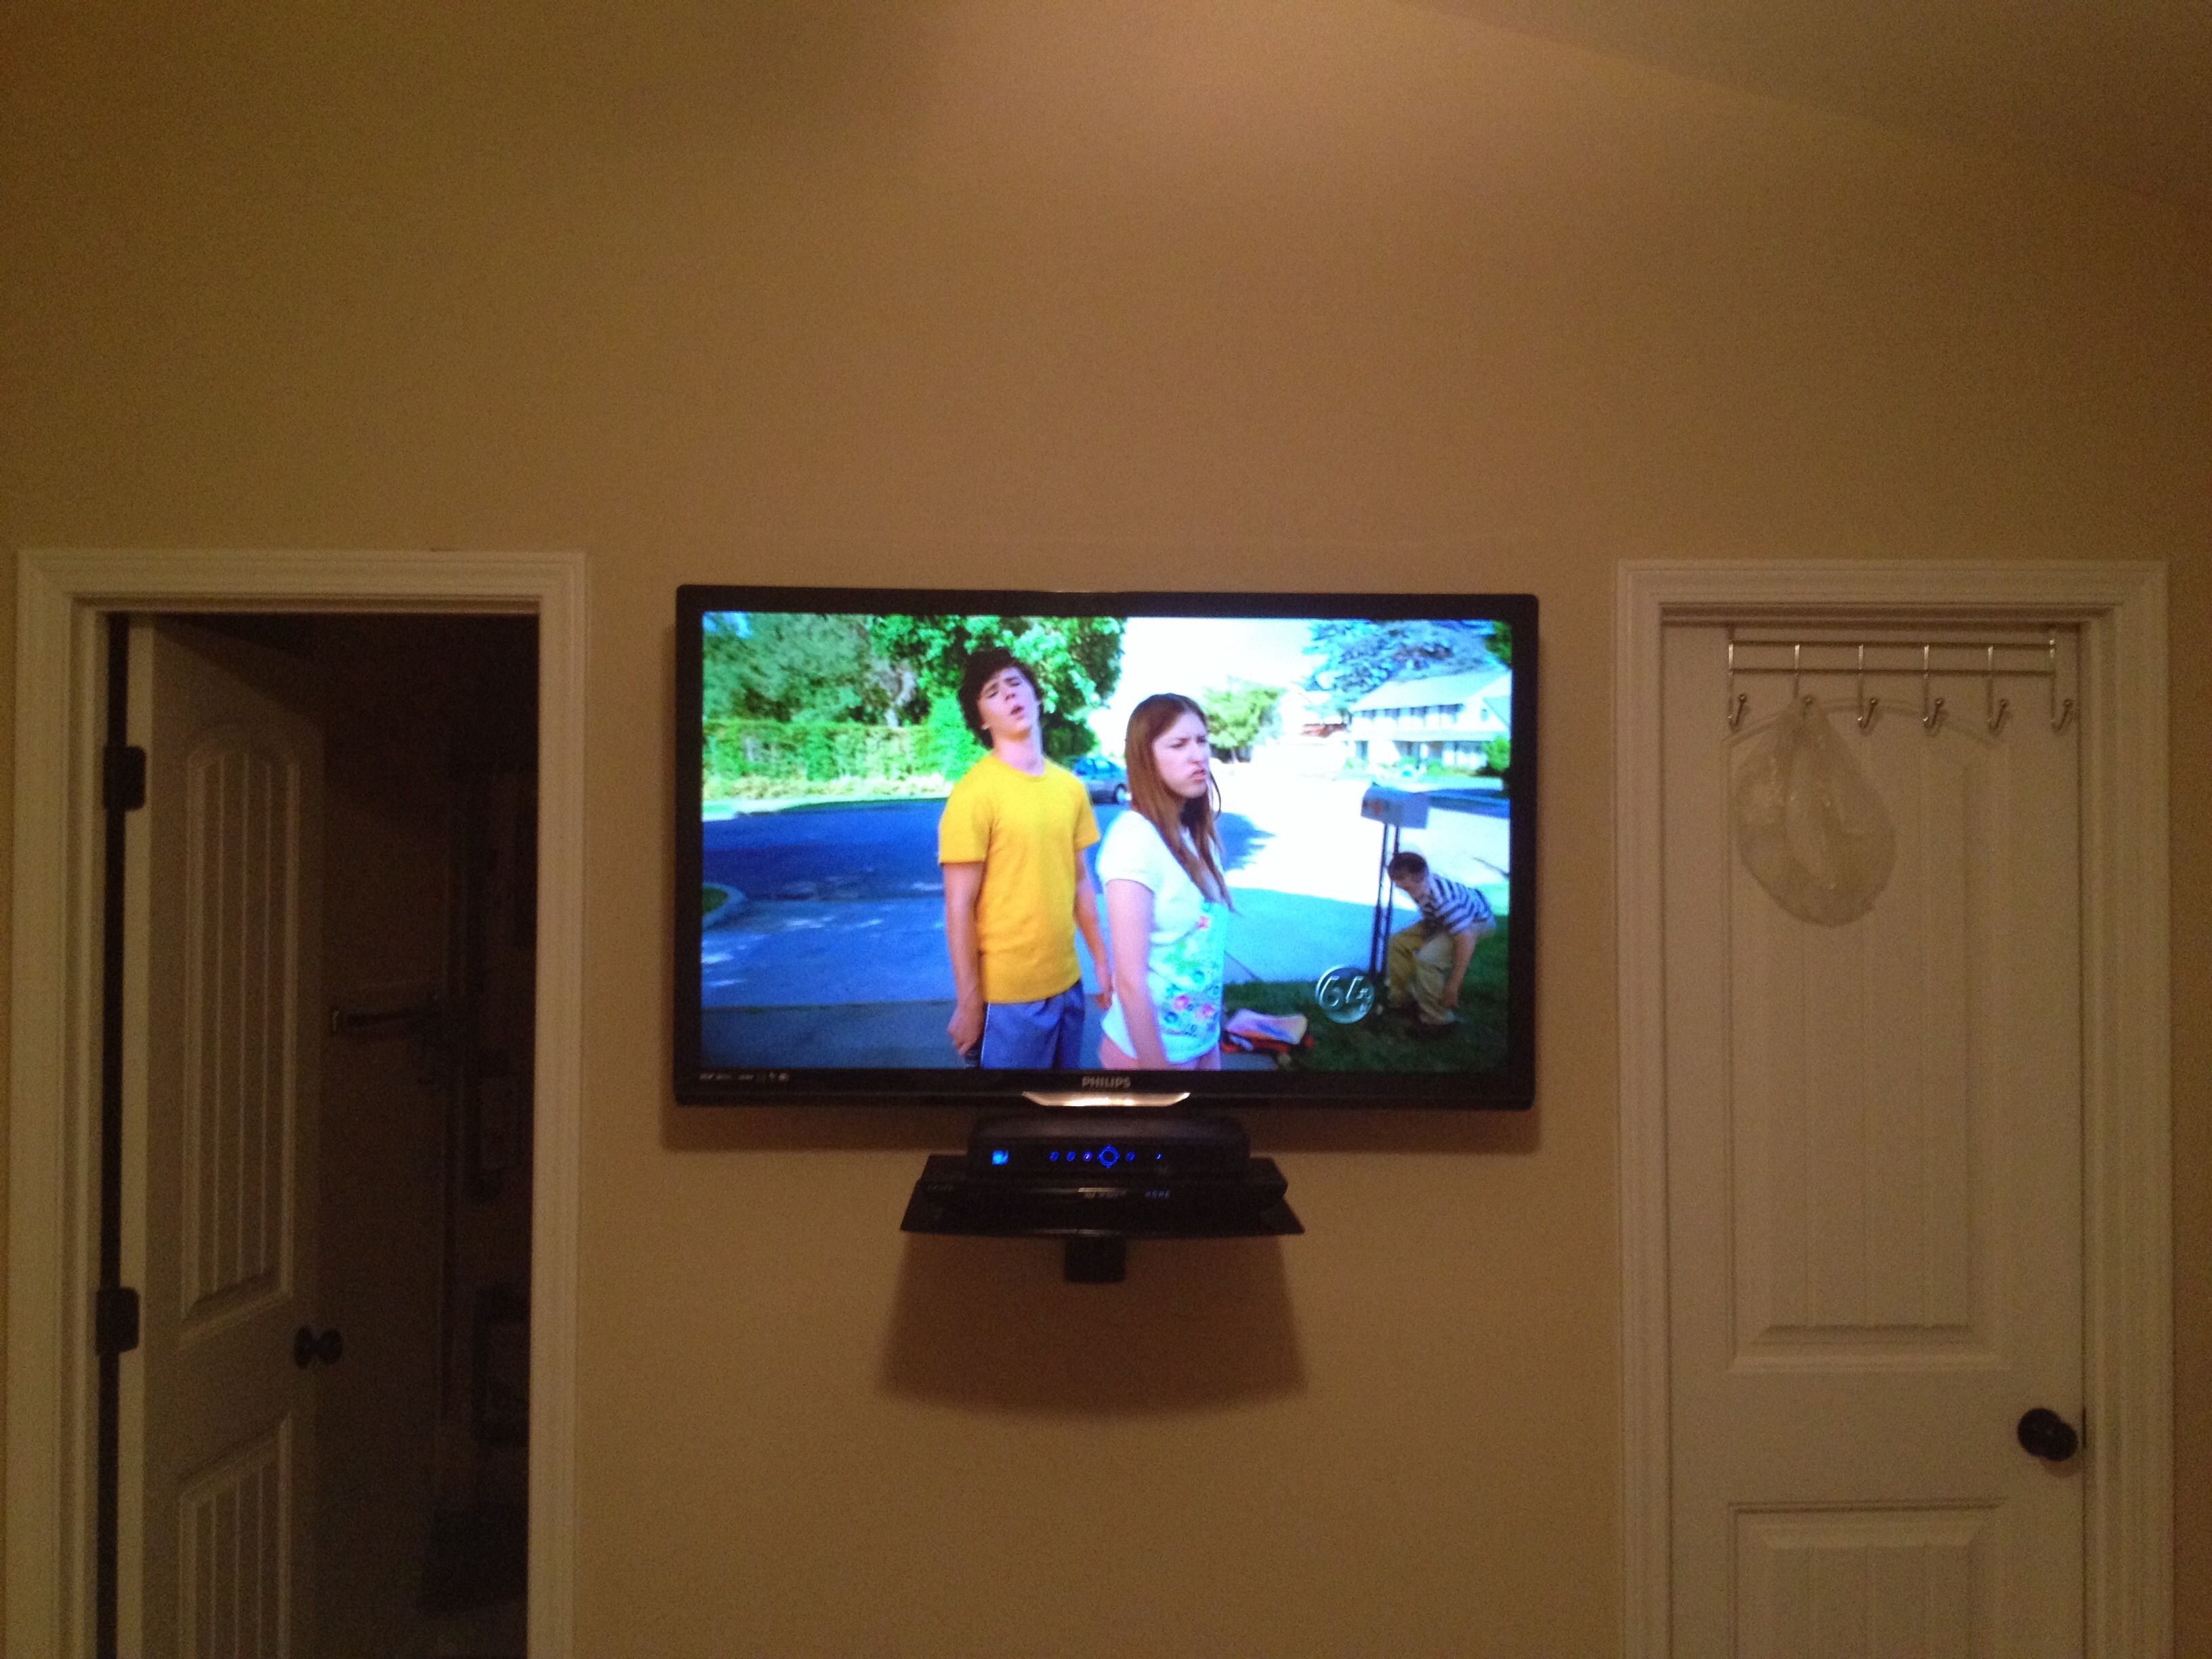 Led Tv Wall Mount Installation With Floating Glass Shelf For Cable For Glass Floating Shelves For Dvd Player (View 12 of 15)